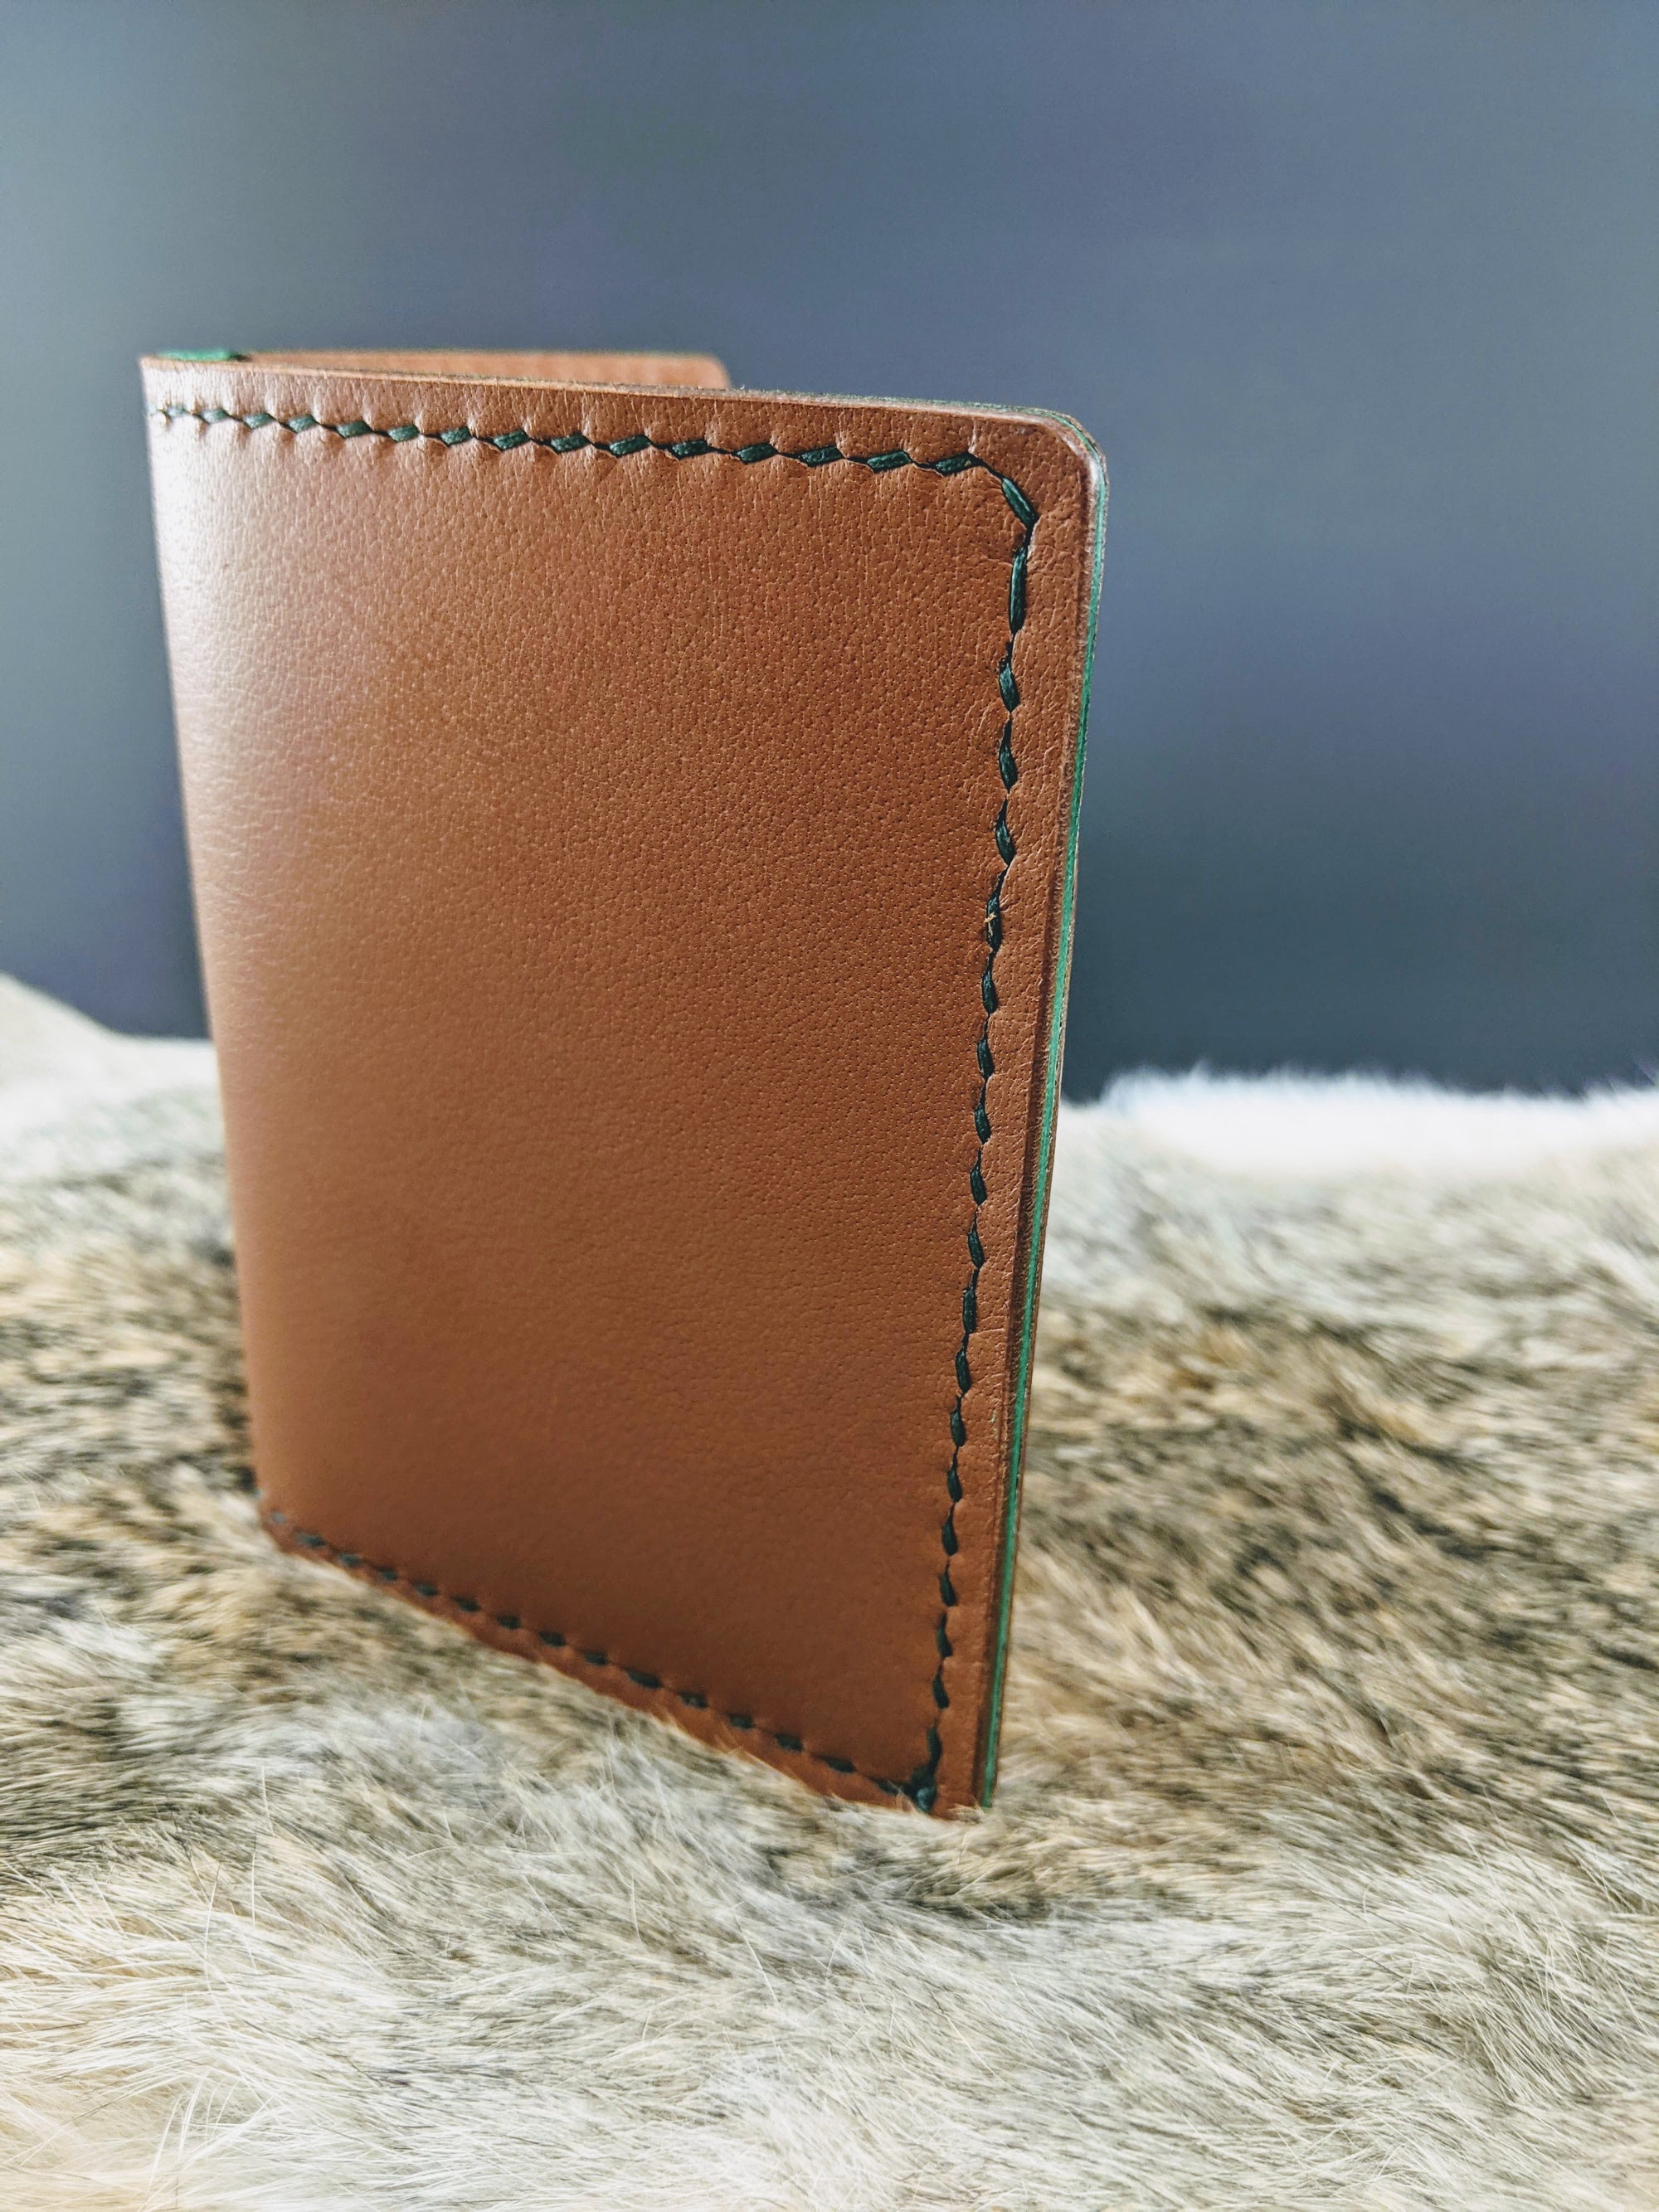 Handsewn Leather Wallet